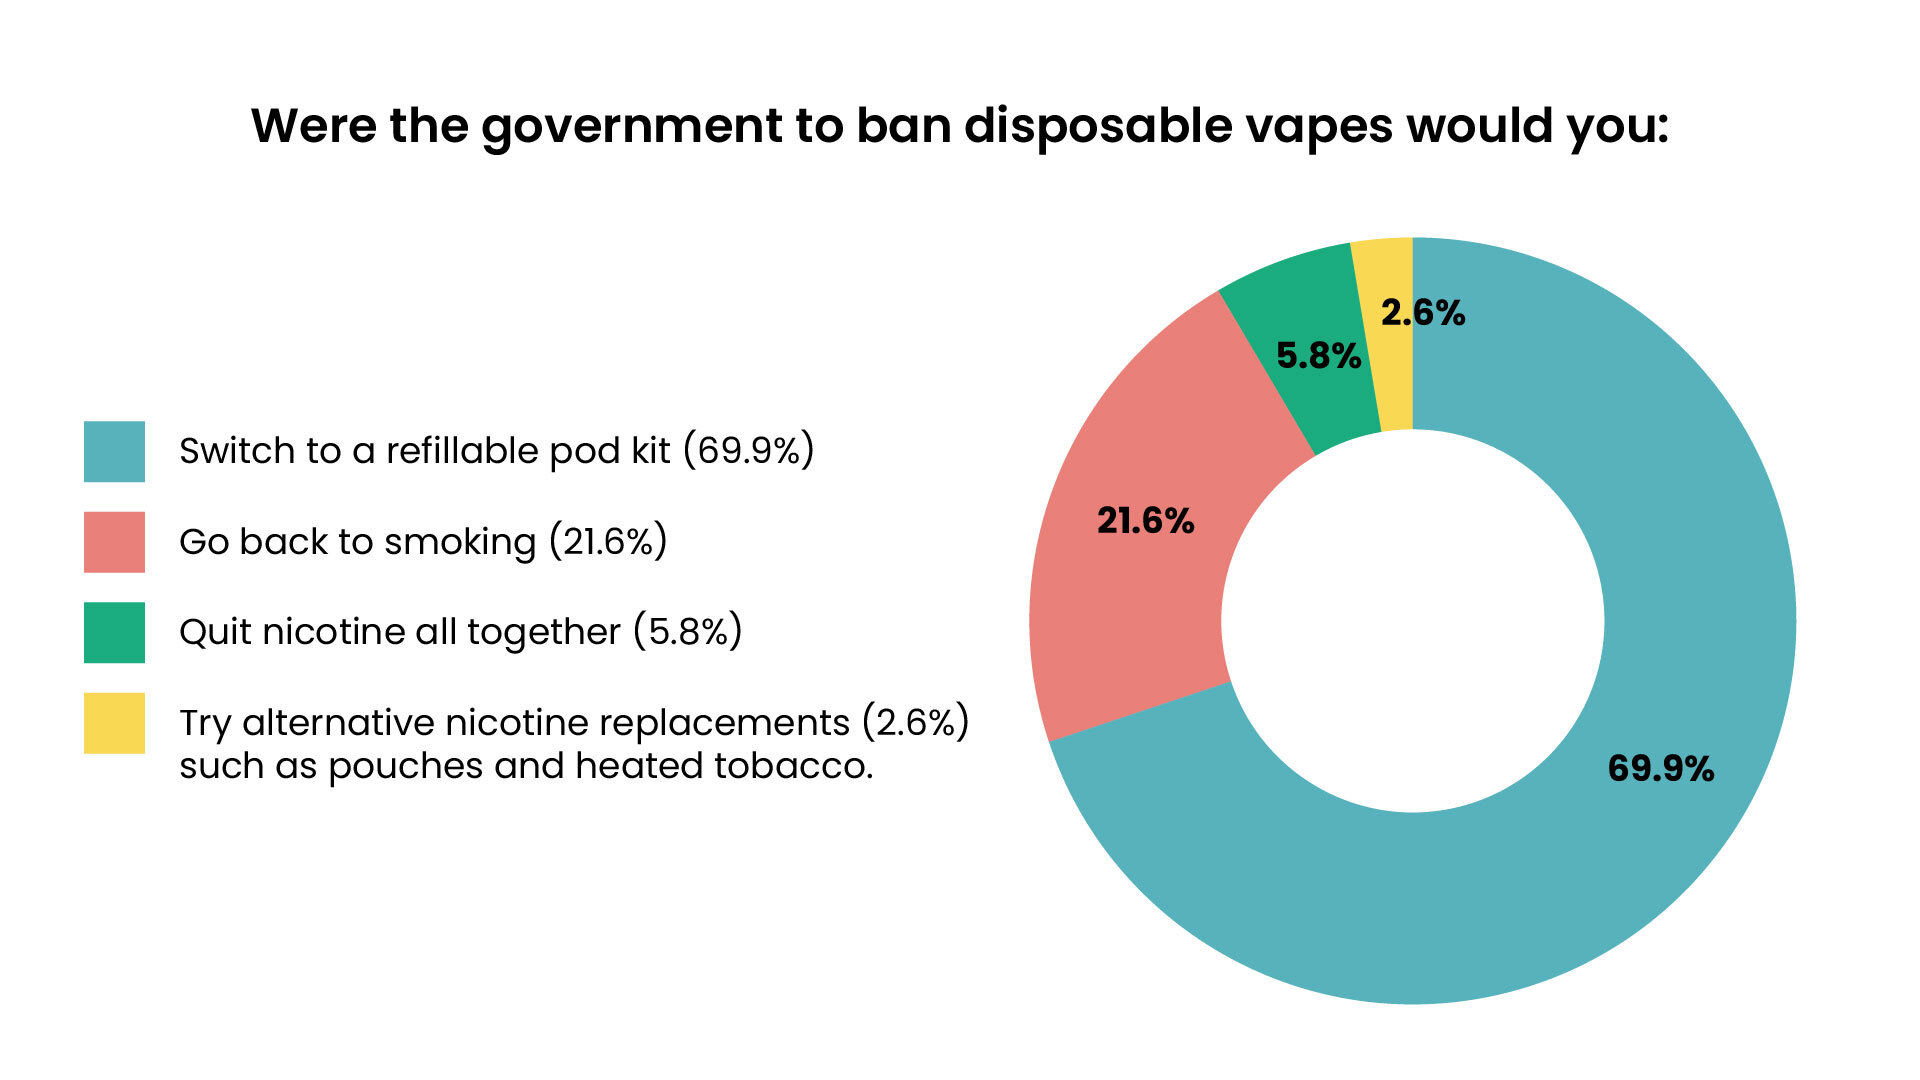 Survey data showing consumer reaction to a government ban on disposable vapes.